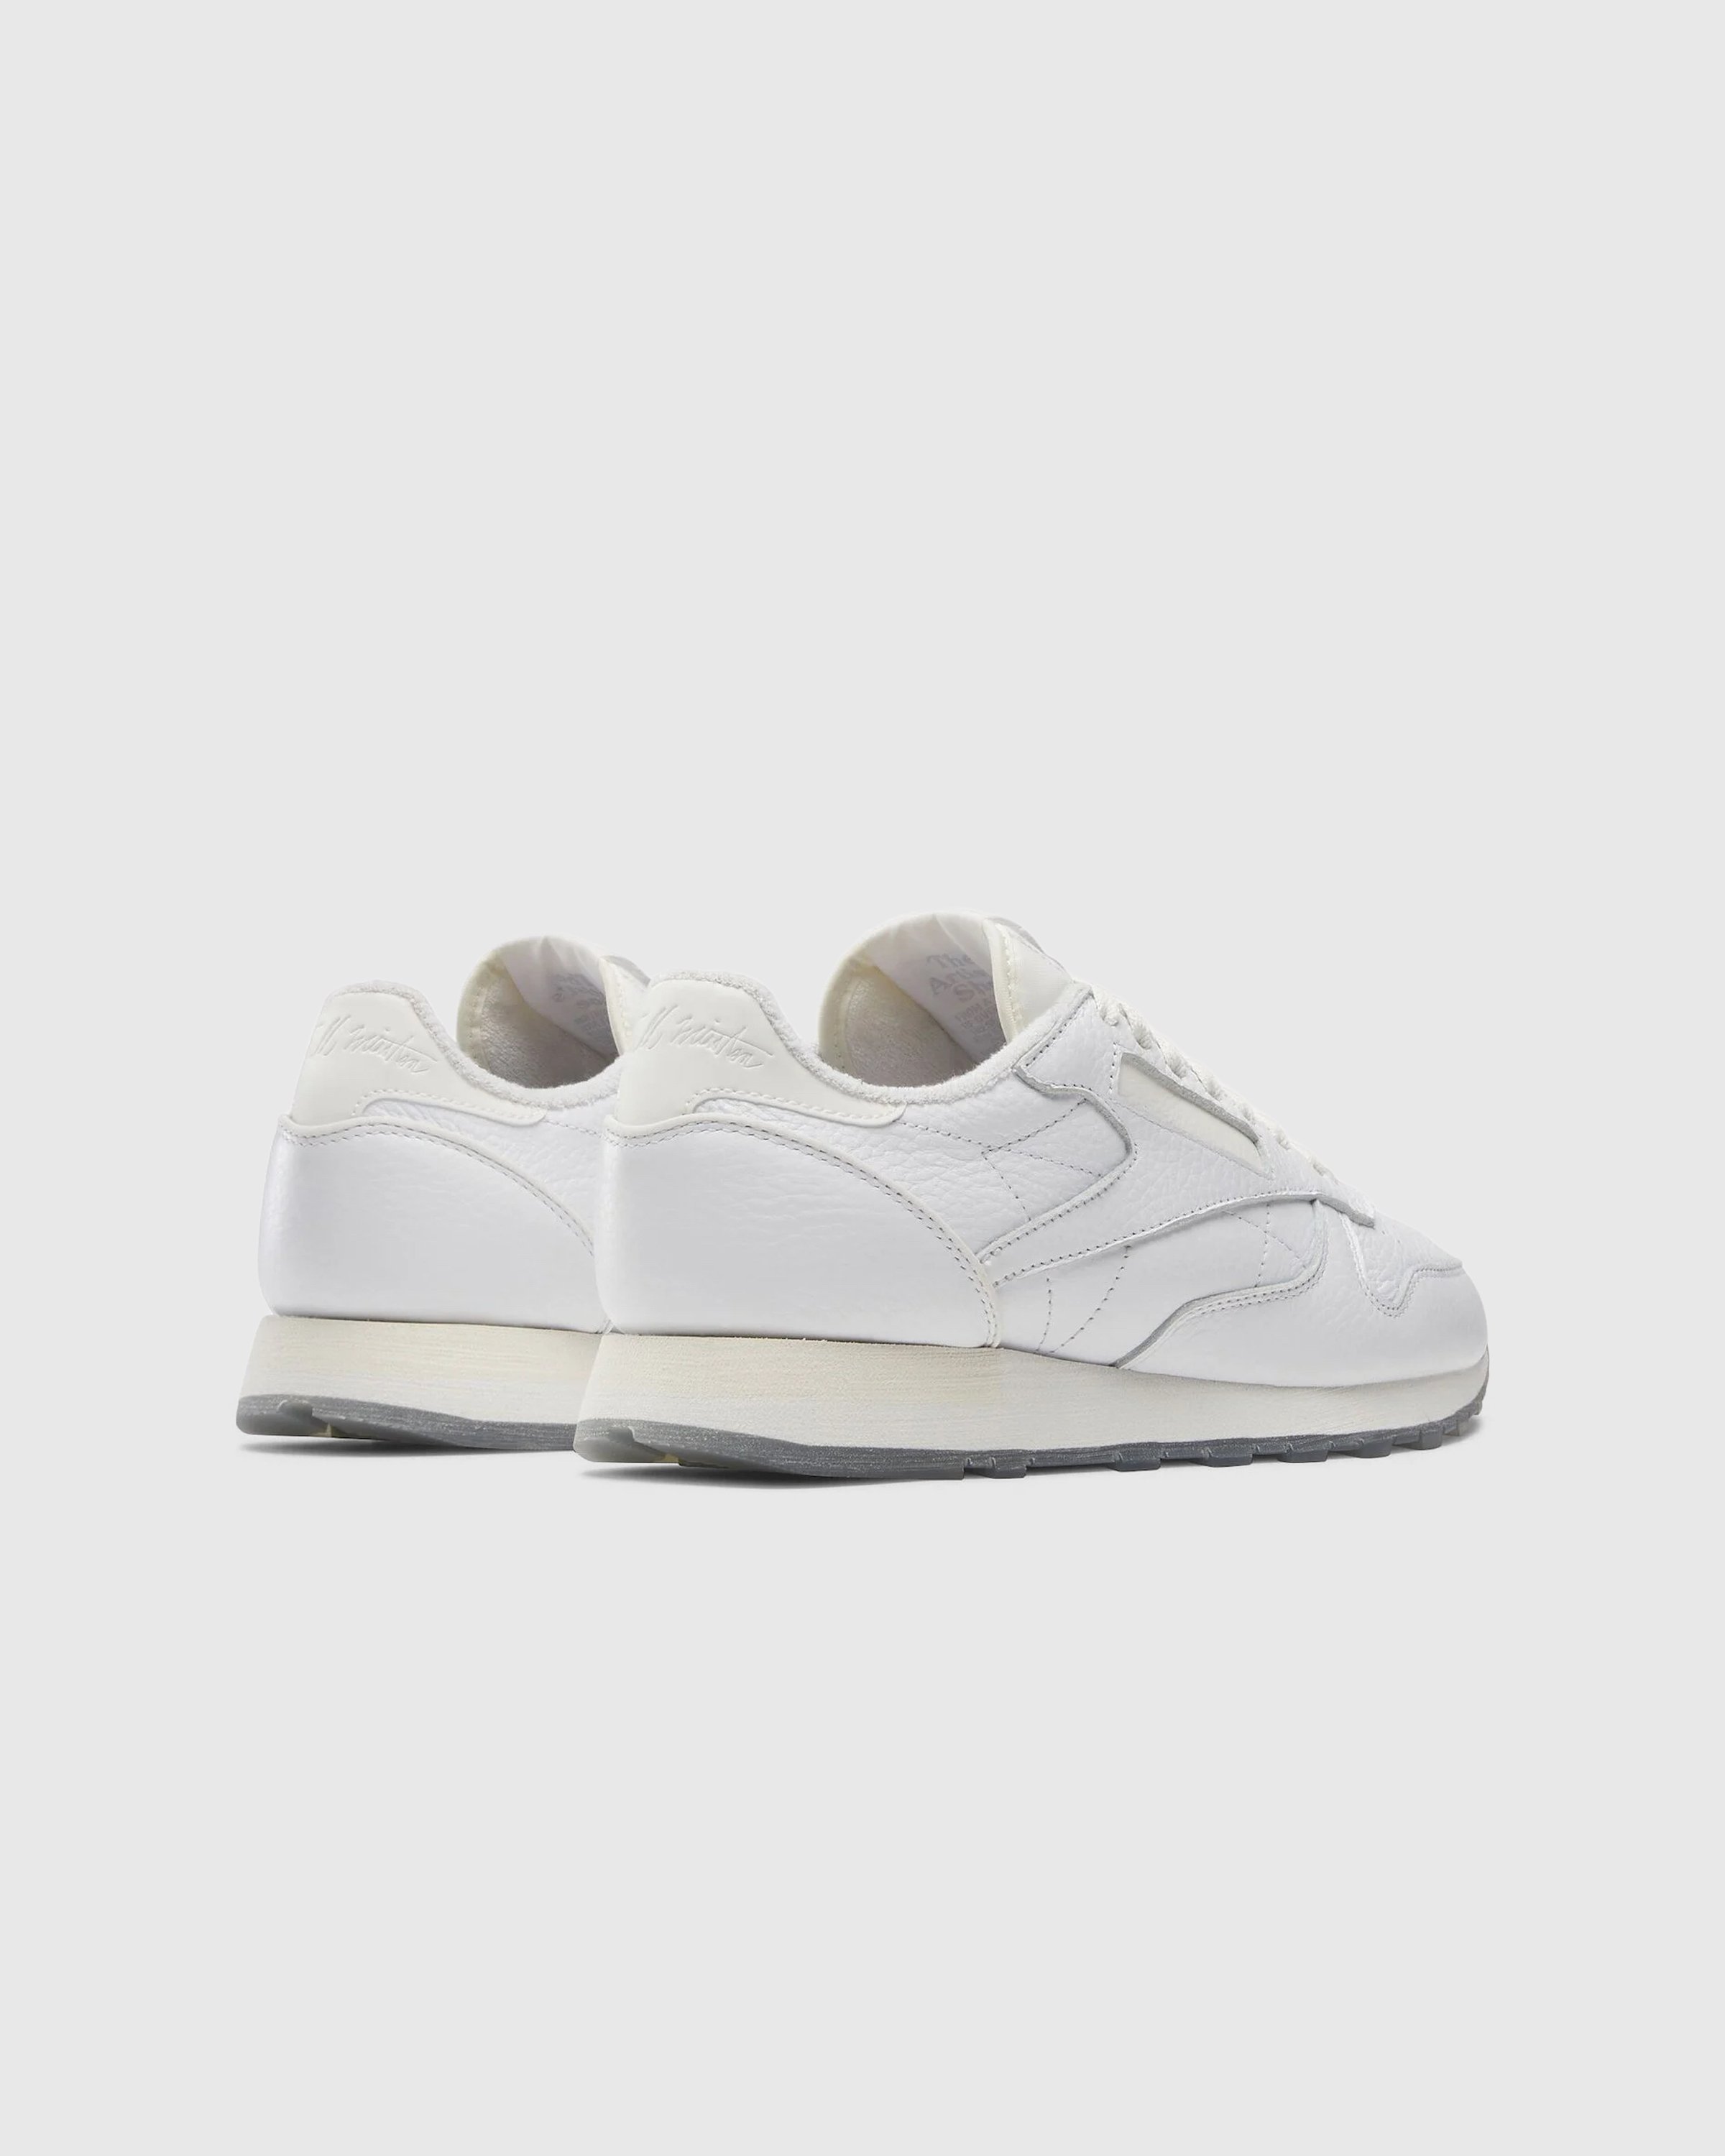 Reebok x Tyrell Winston - Classic Leather ftwr white/chalk/cold grey 2 - Footwear - White - Image 3